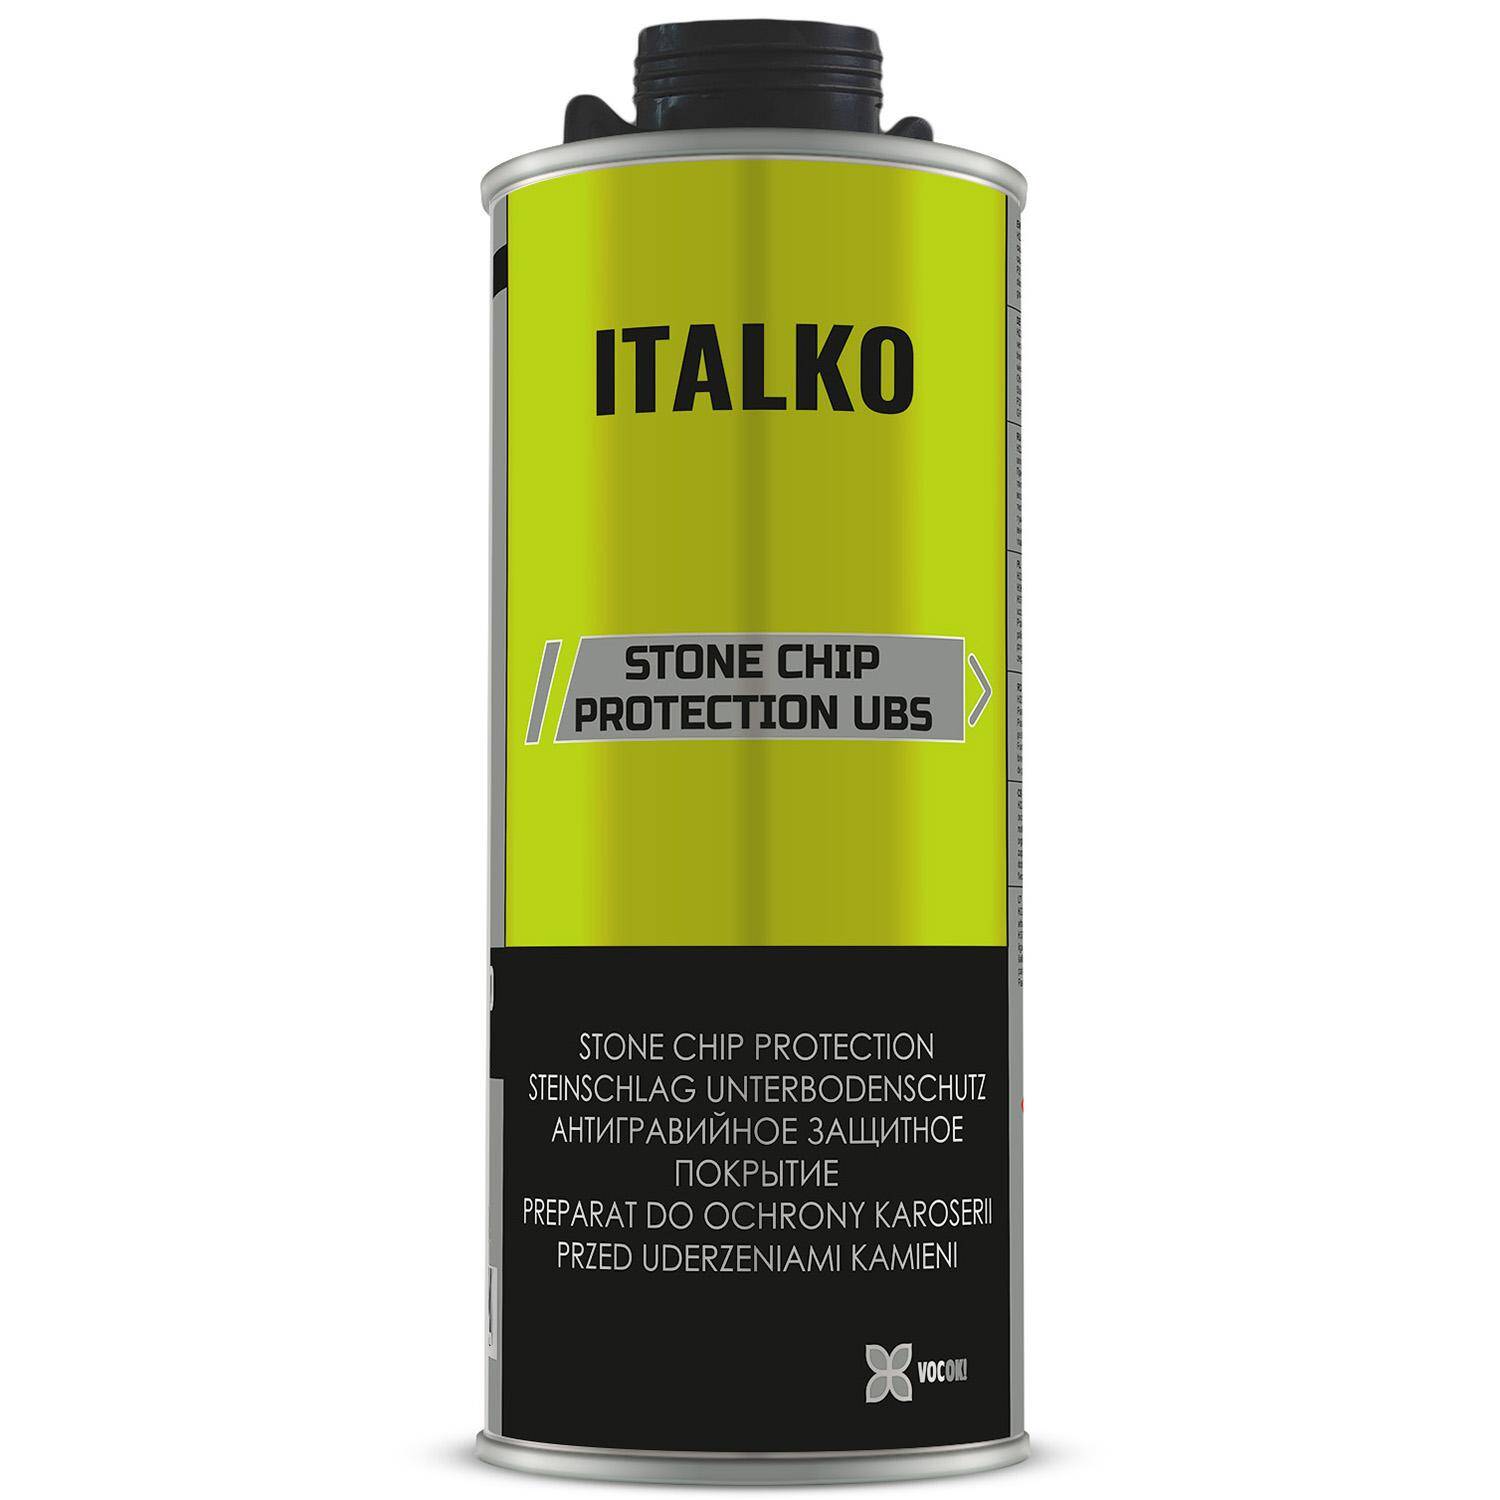 ITALKO STONE CHIP PROTECTION UBS 1 KG